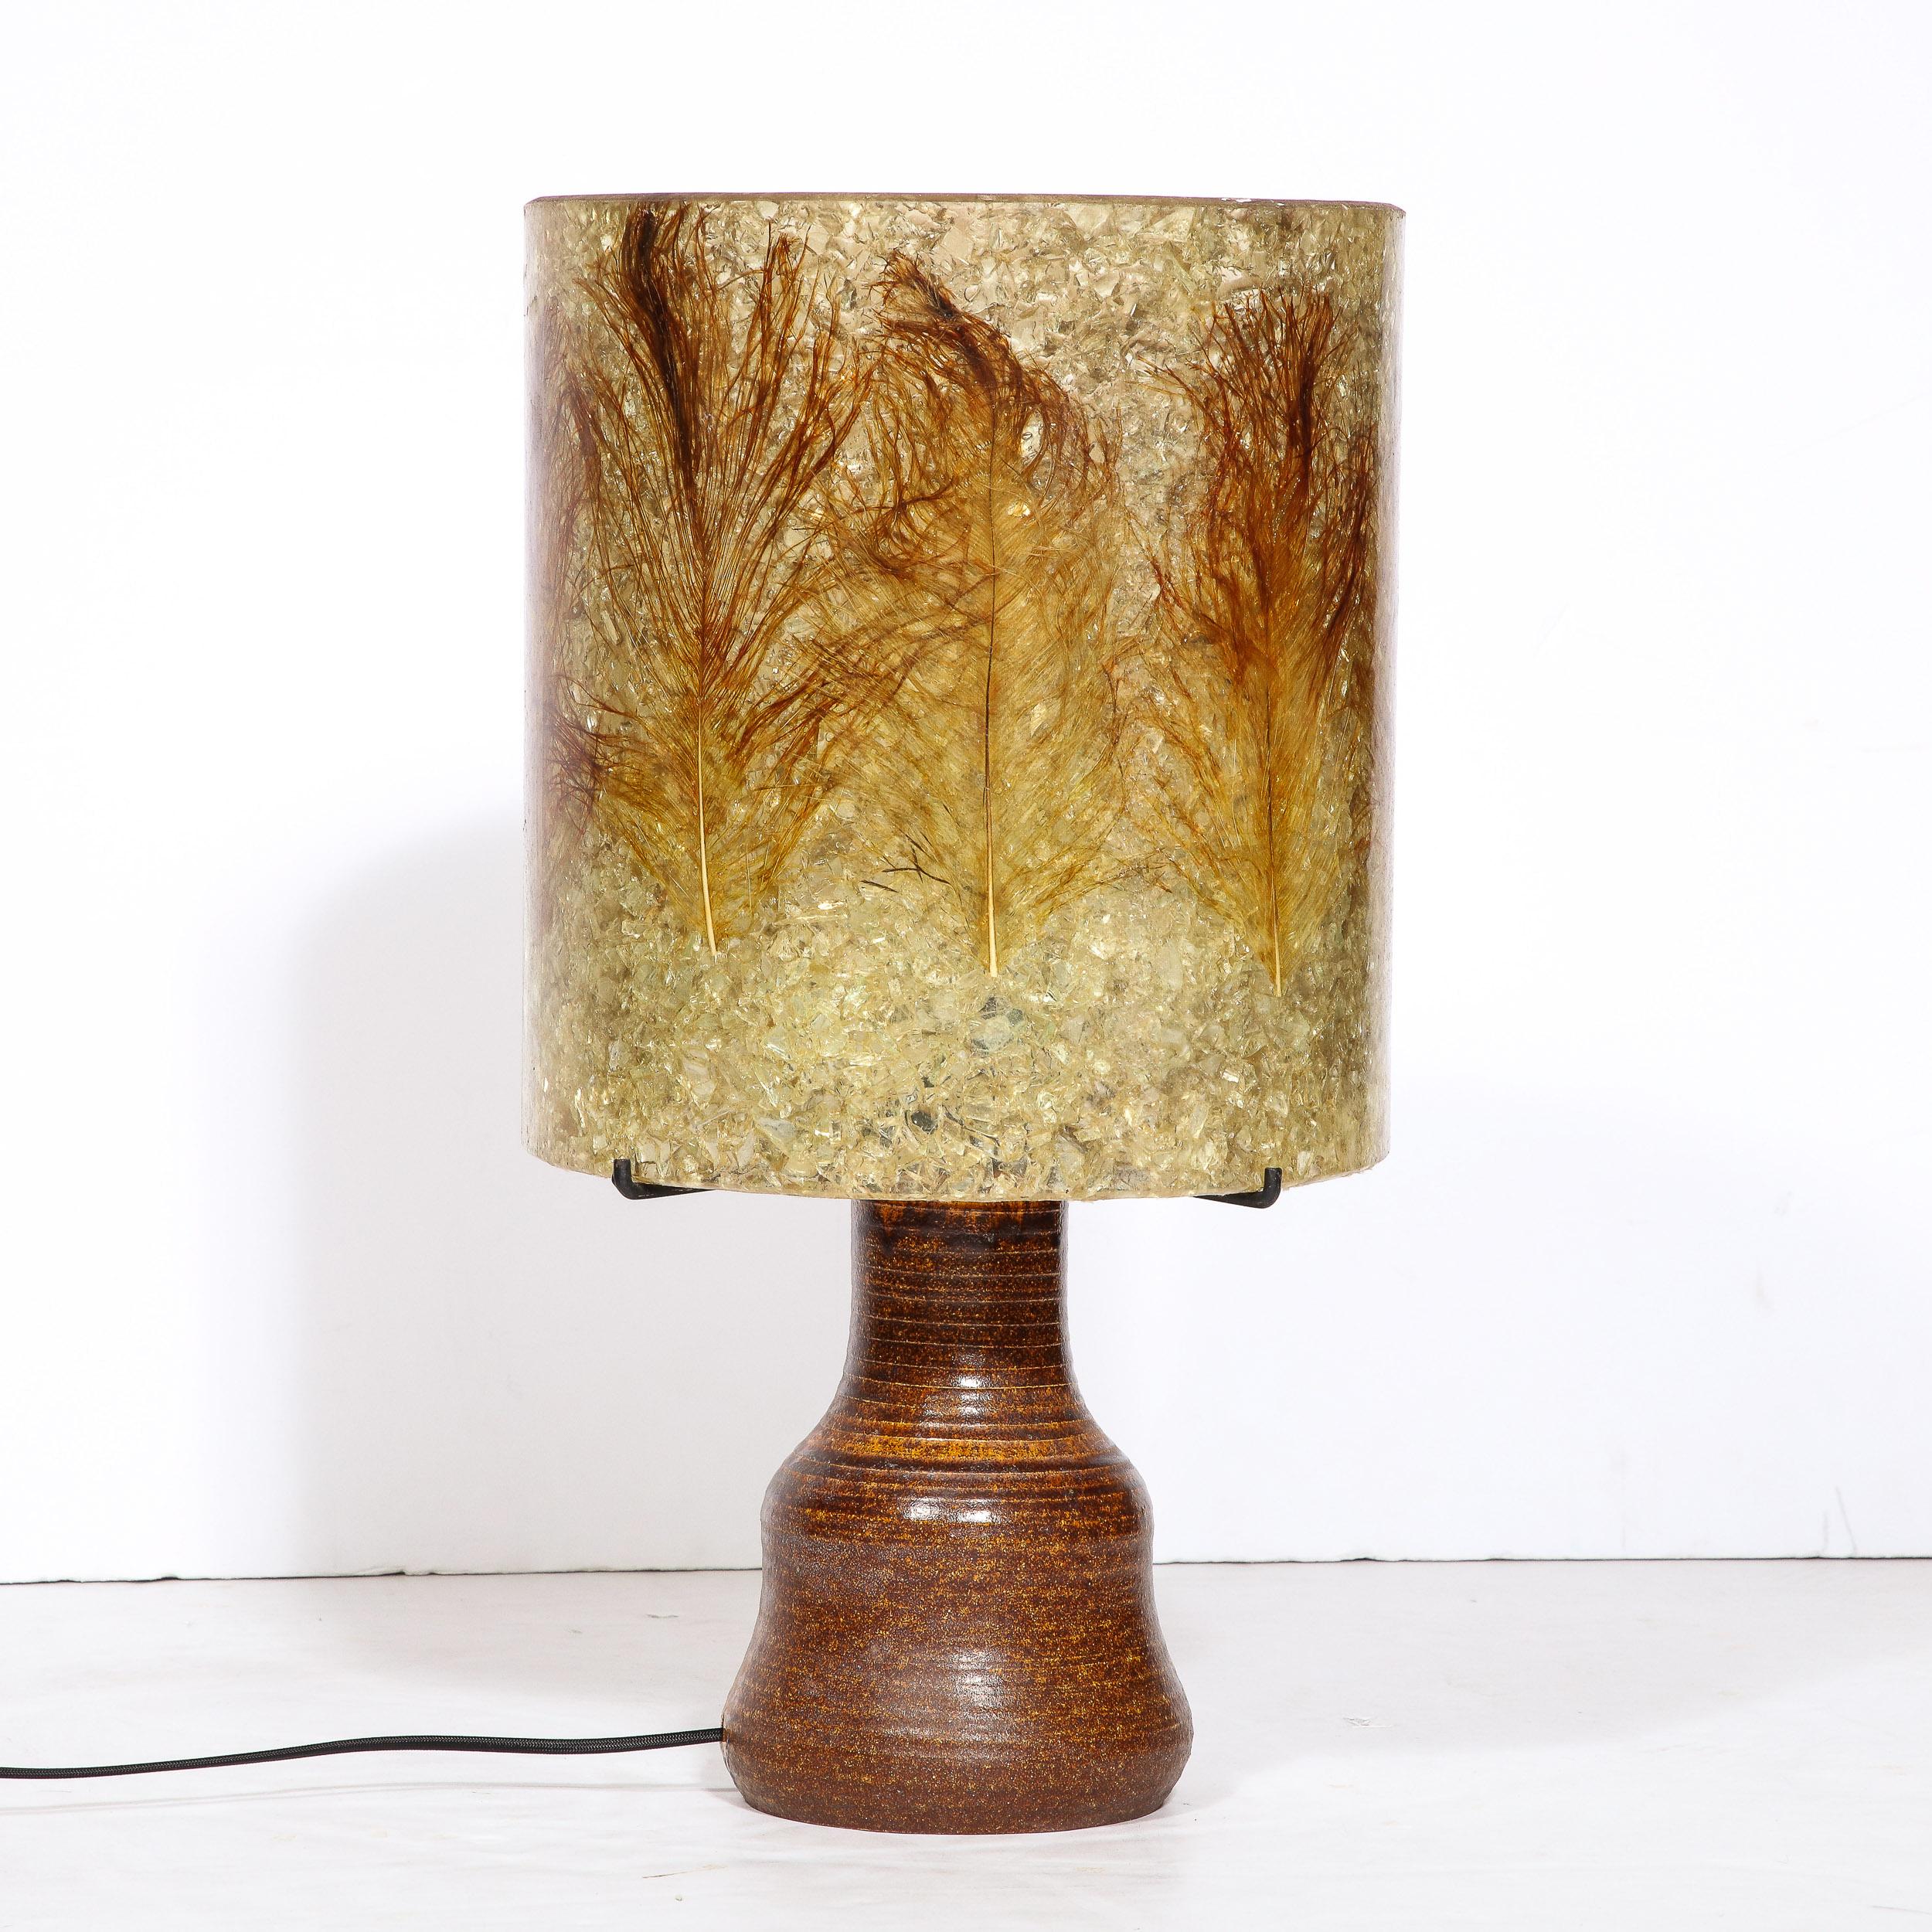 Mid-20th Century Mid-Century Modernist Ceramic Table Lamp in Red Iron Oxide with Resin Shade  For Sale